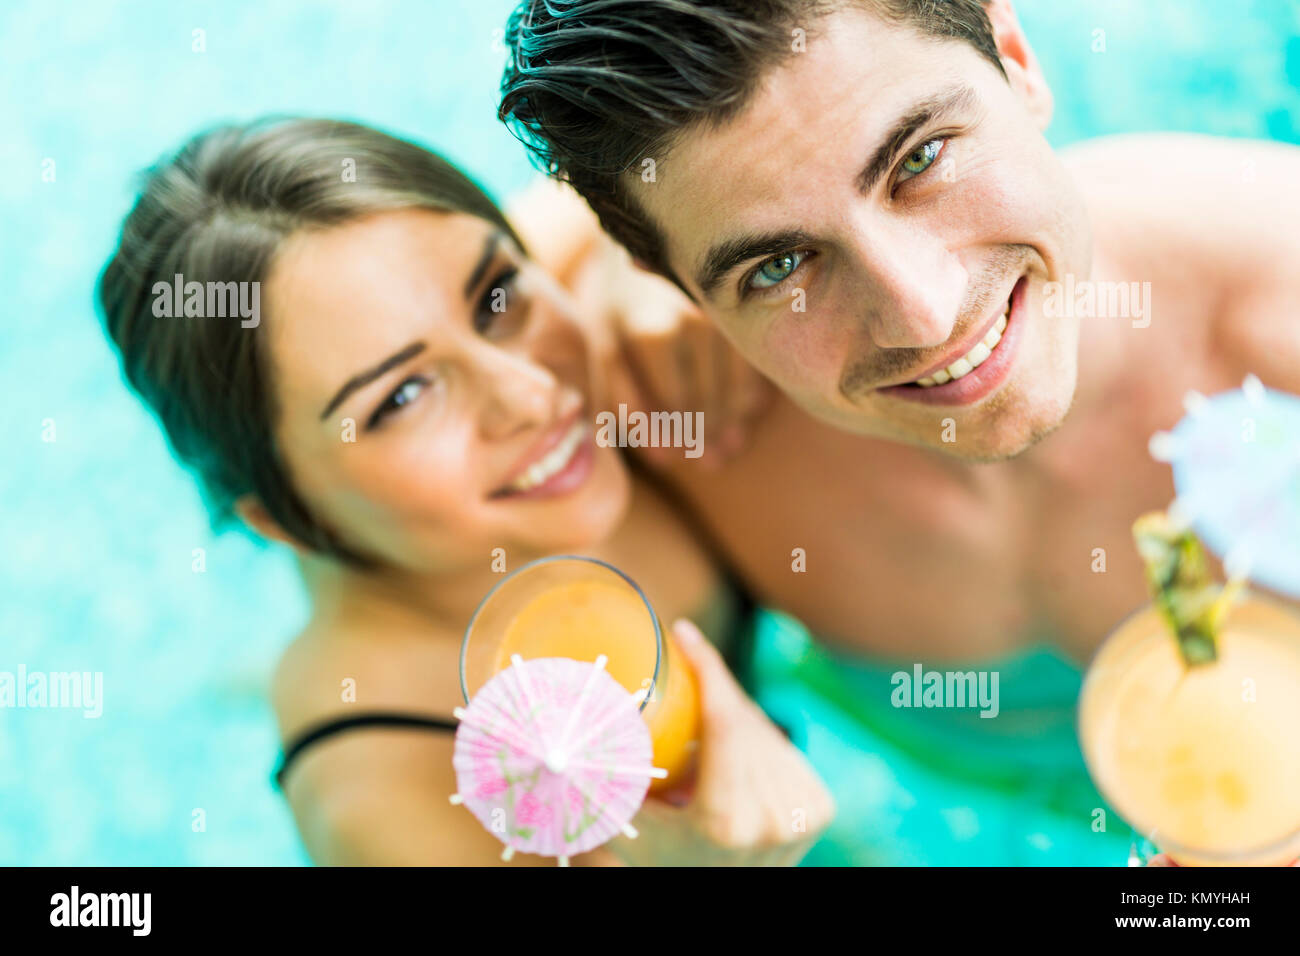 Portrait of a woman drinking a cocktail in a pool Banque D'Images